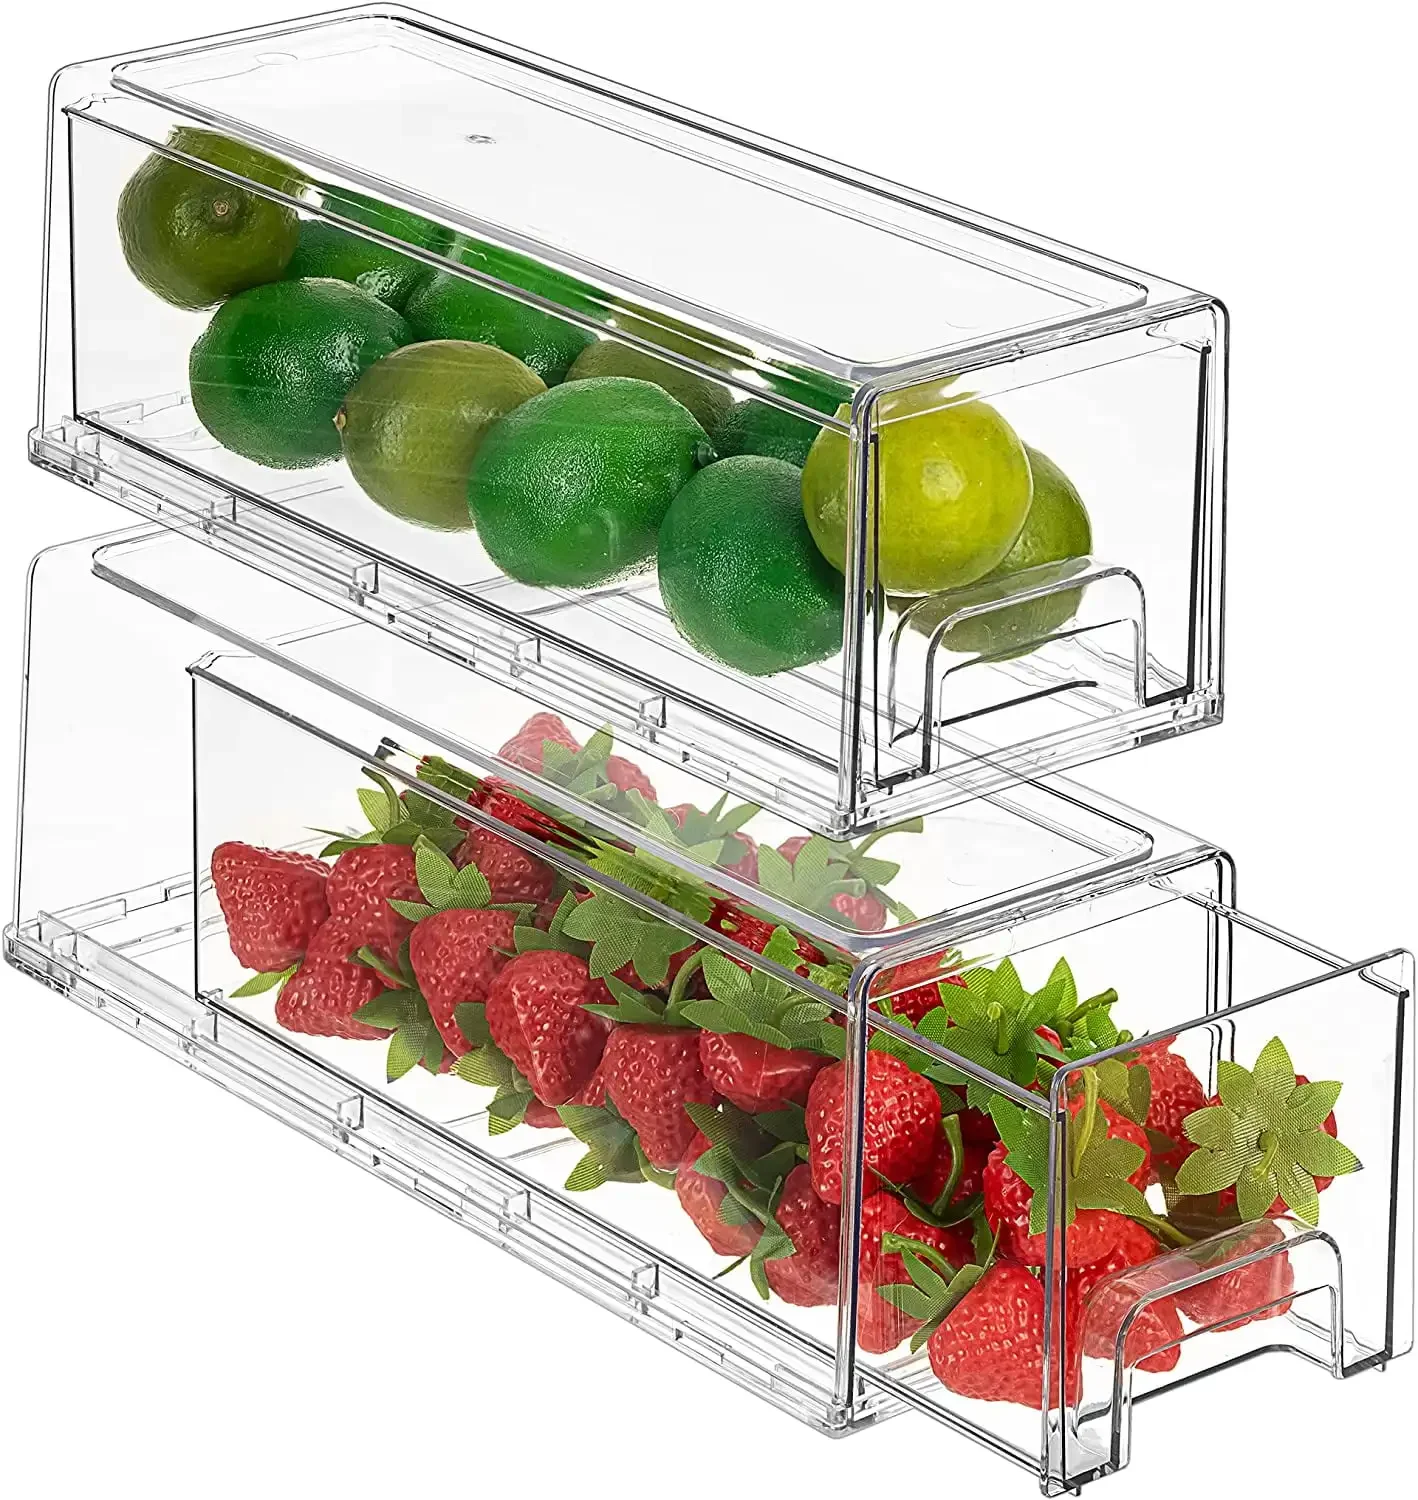 

Fridge Drawers - Clear Stackable Pull Out Refrigerator Organizer Bins (2 Pack | Small)